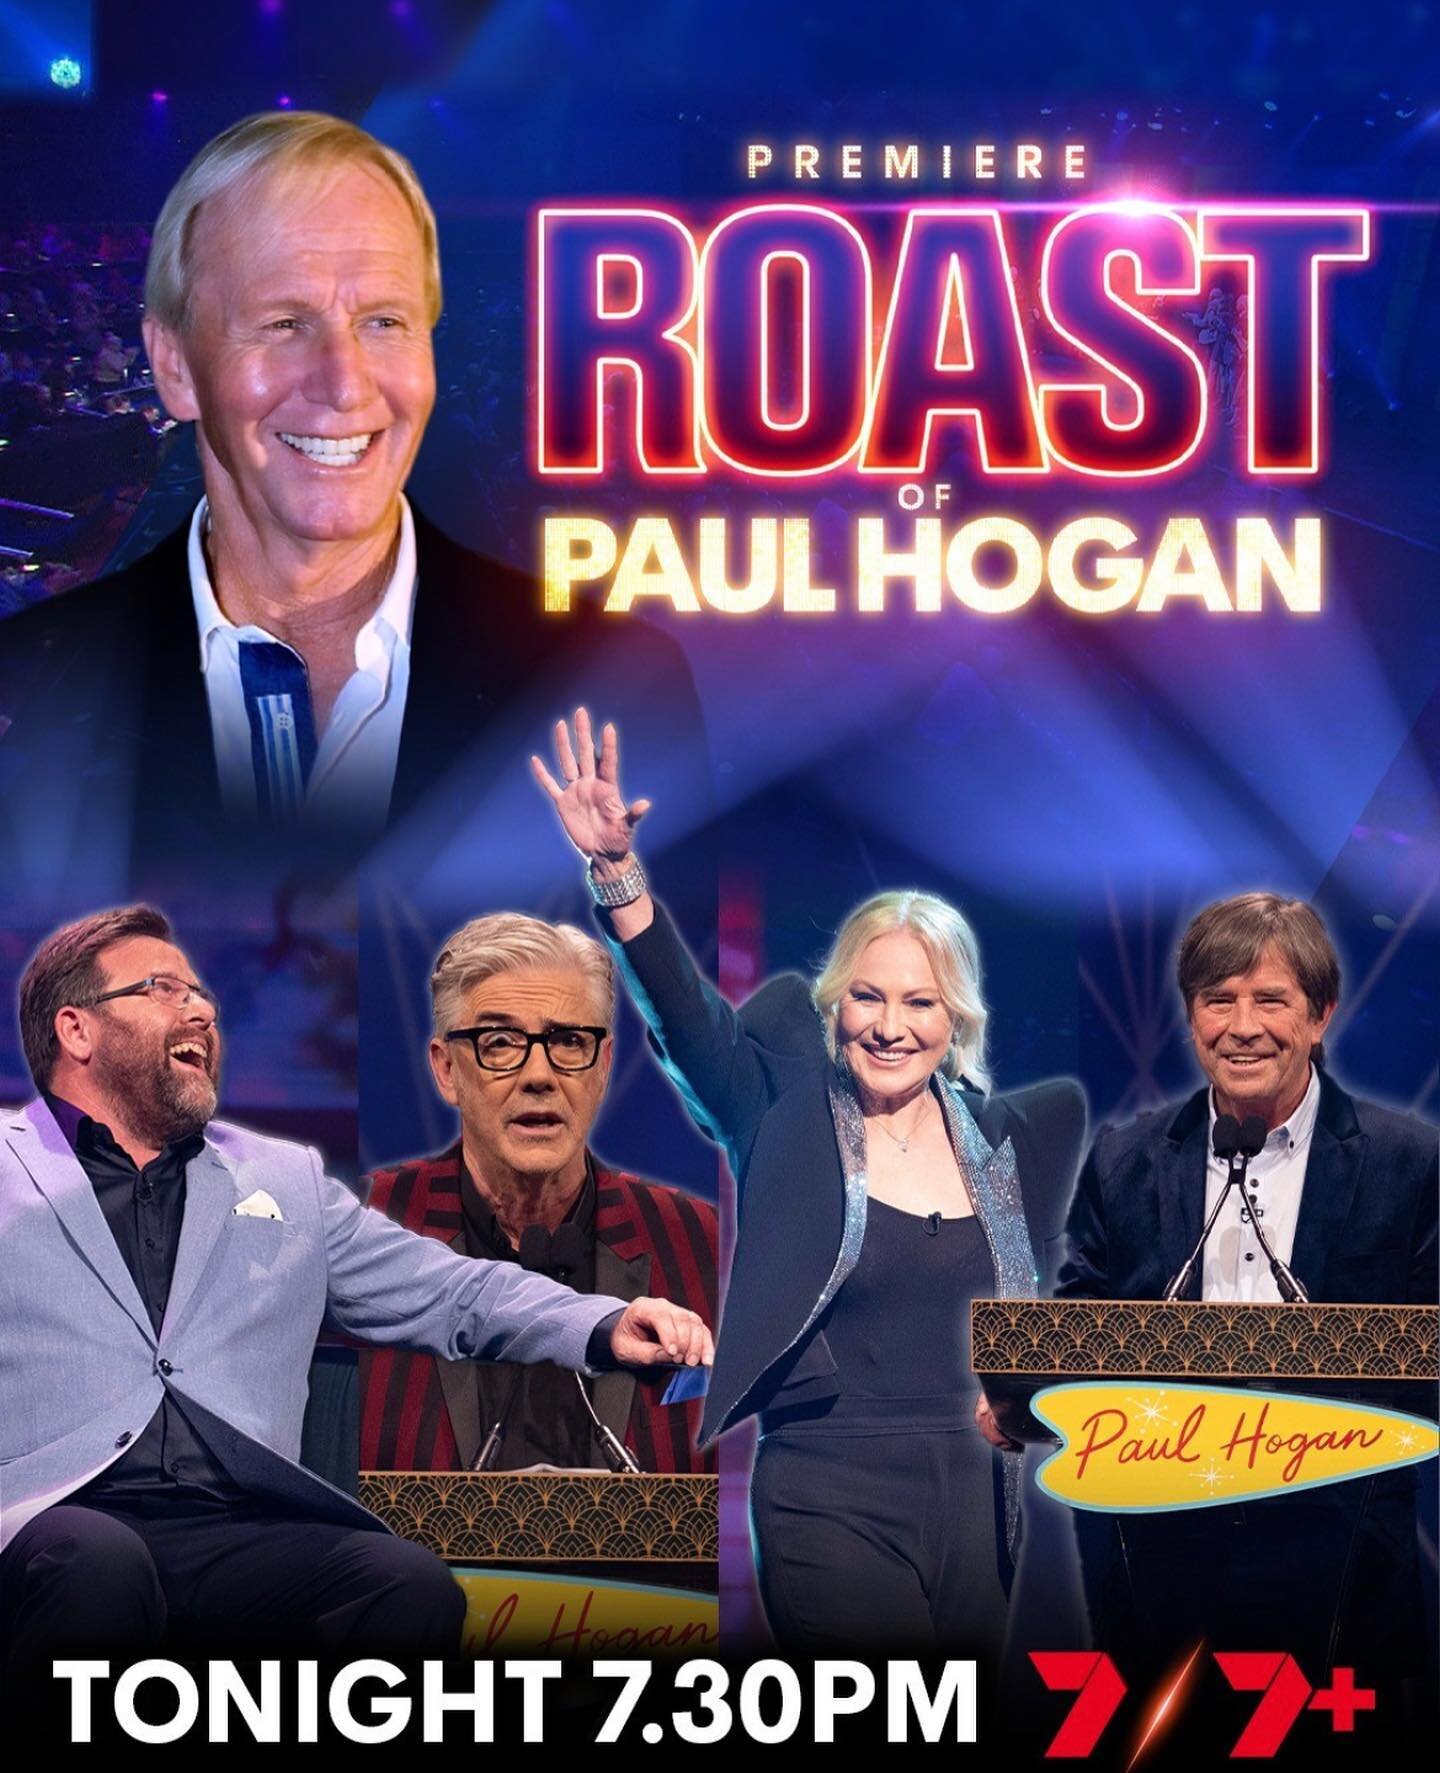 #HogesRoast tonight 7:30pm featuring @kerriannekennerley on @channel7 and @7plus. #22mgmt